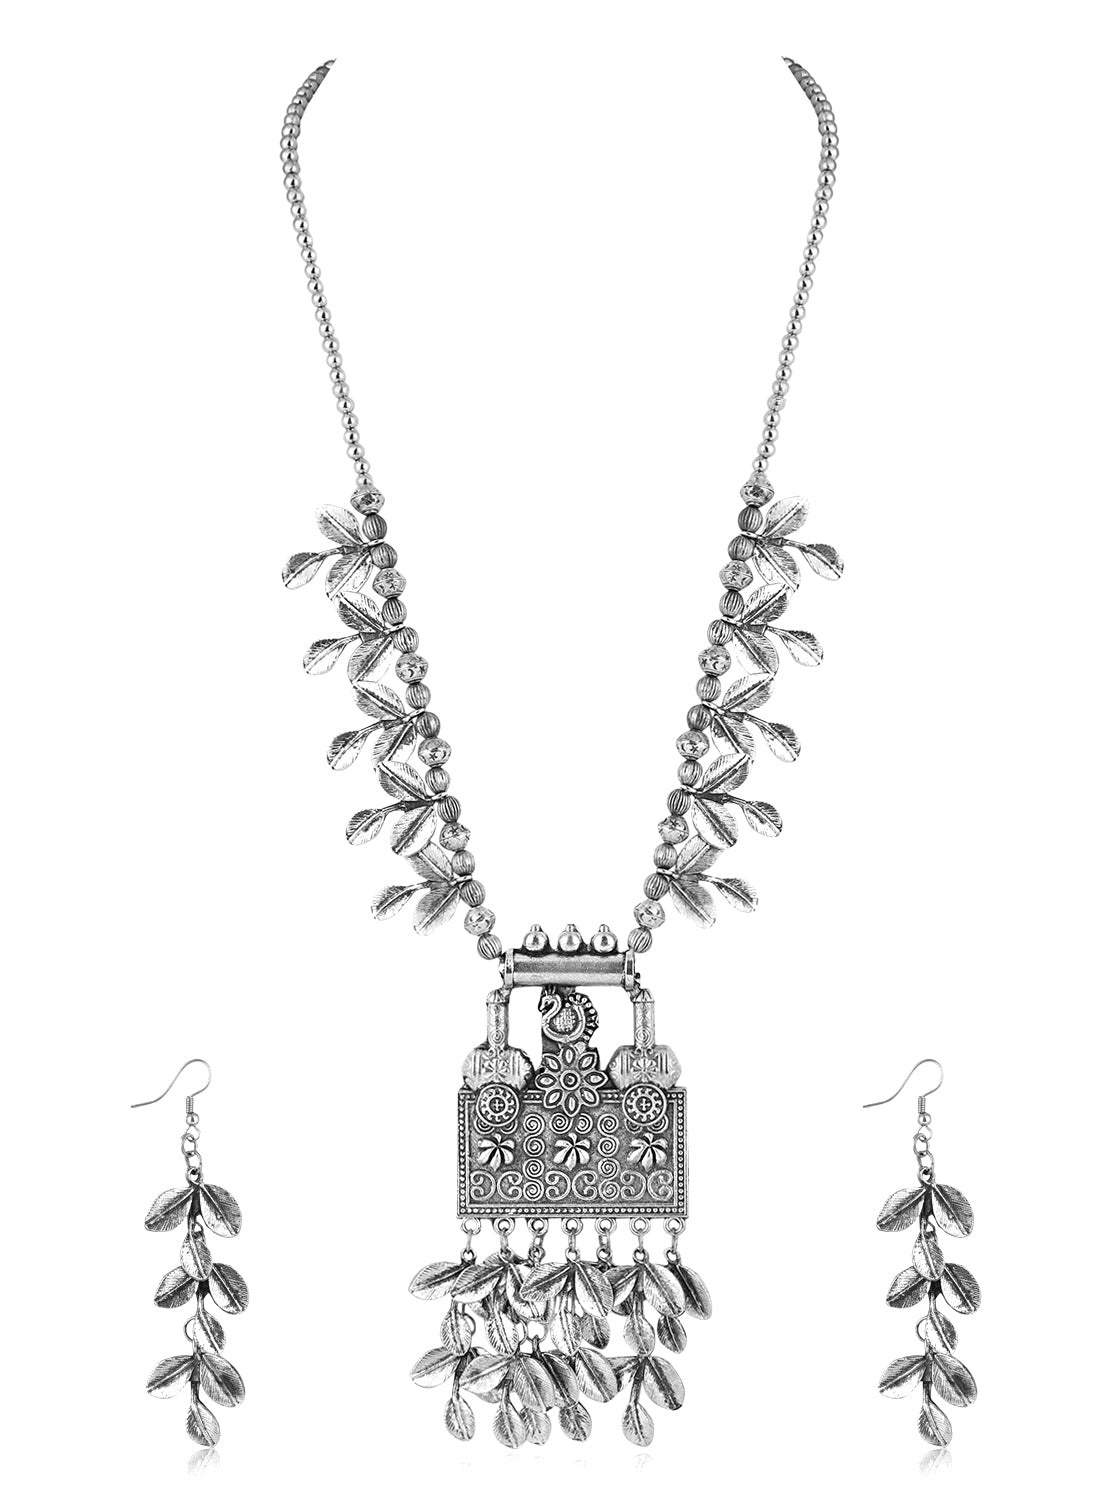 Mekkna Women's Pride Silver Plated Necklace with Earrings | Buy This Jewellery Online from Mekkna